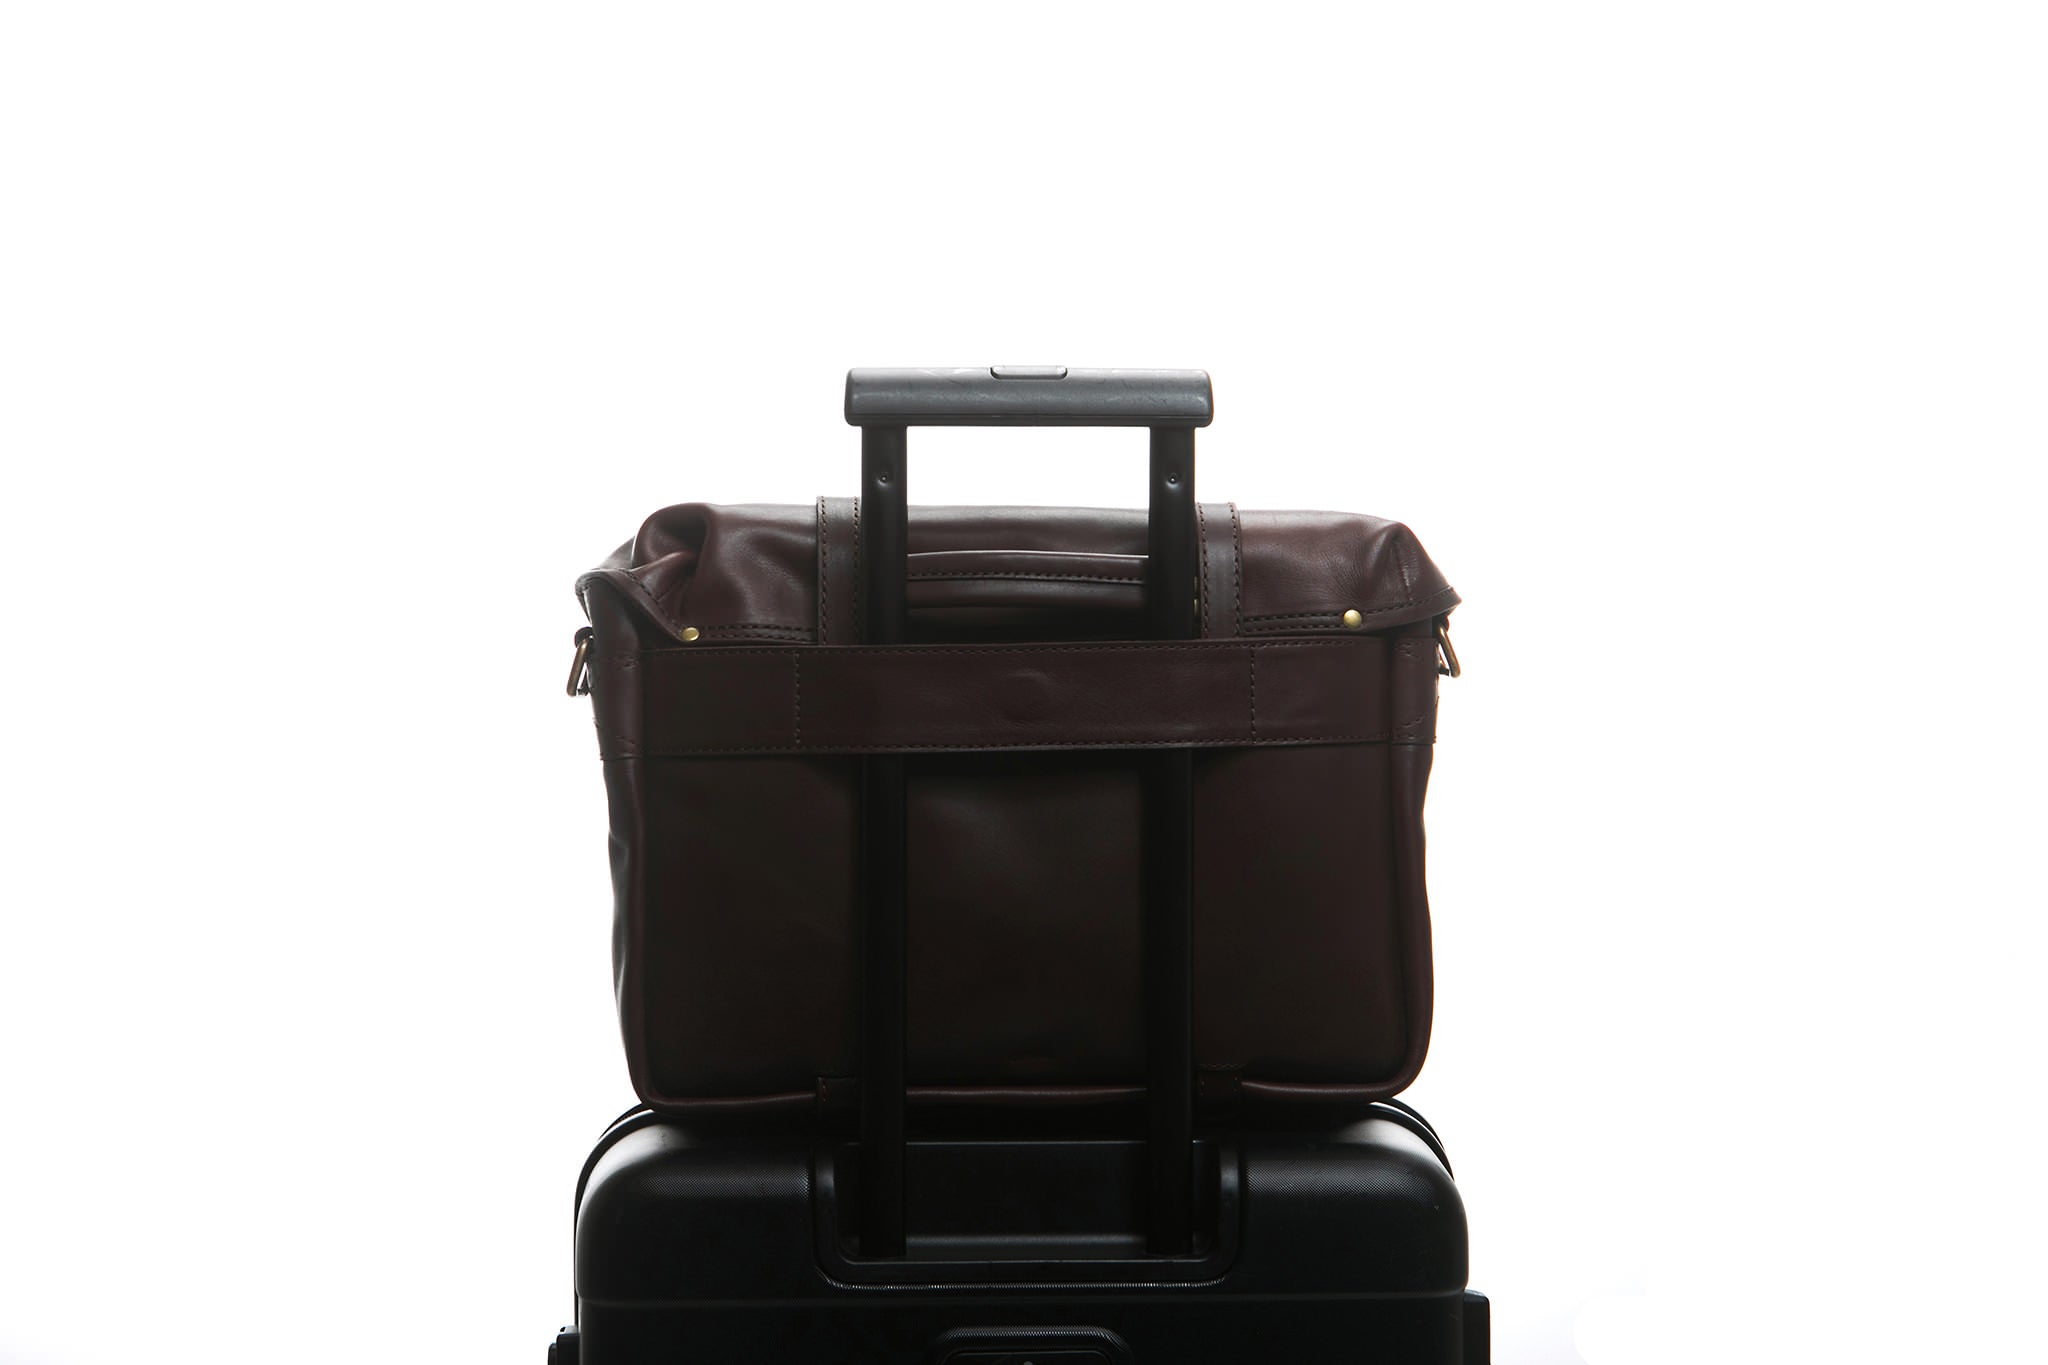 Traveling made easy with a Cravar bag. Shown here with an all leather F.C. bag.